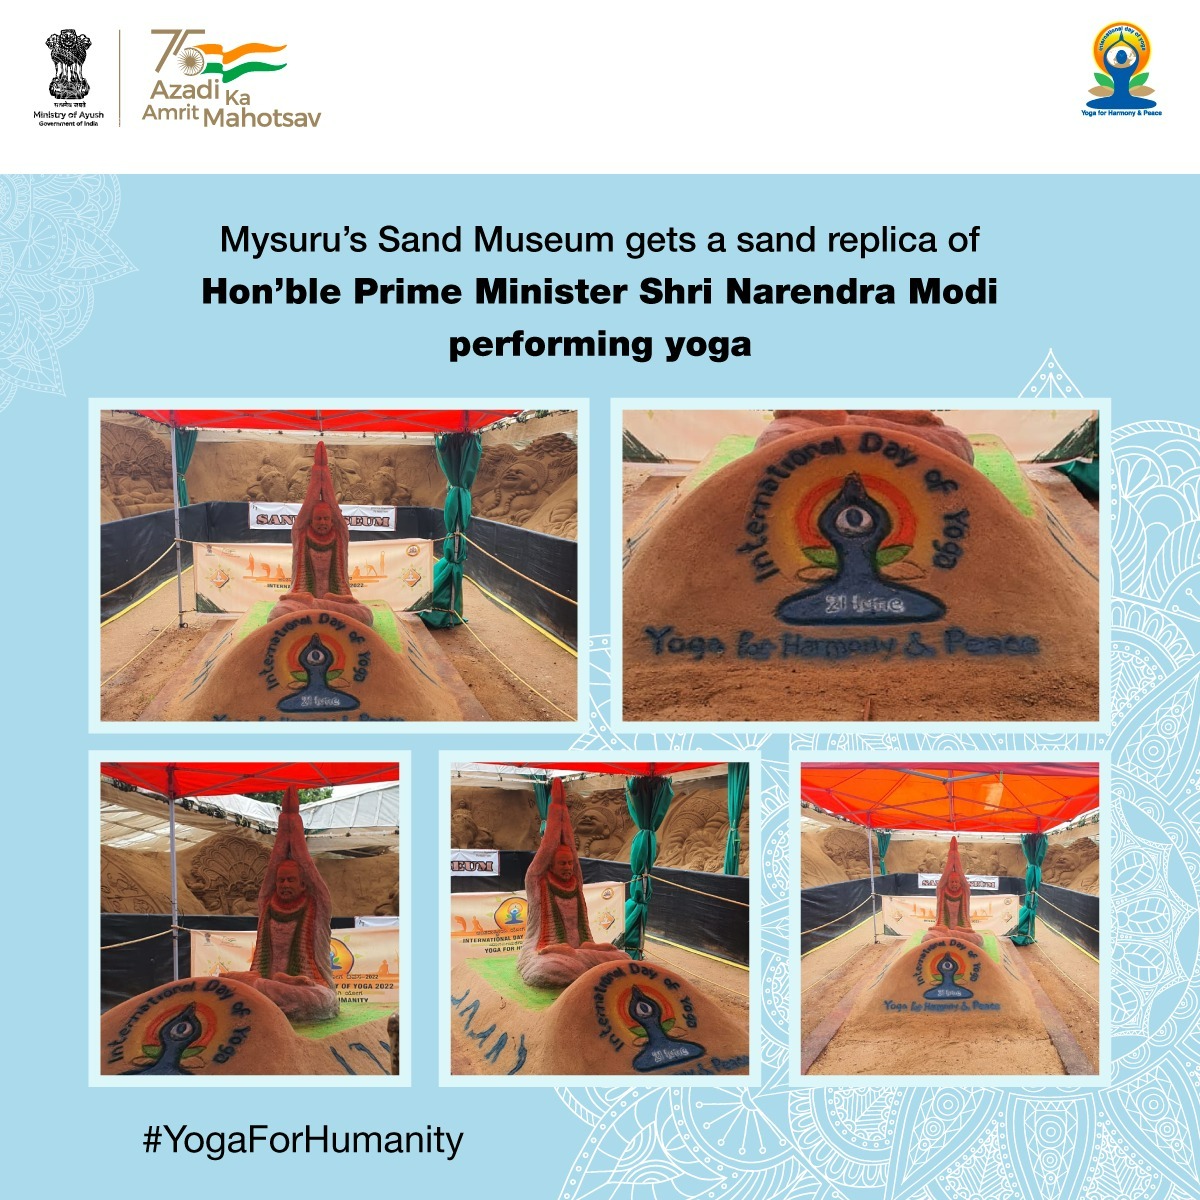 The inspiration behind this latest addition is Hon'ble PM Shri @narendramodi performing Yoga on the occasion of #IDY2022 in Mysuru. It aims to inspire people to adopt Yoga as a lifestyle. #YogaForHumanity #AmritMahotsav